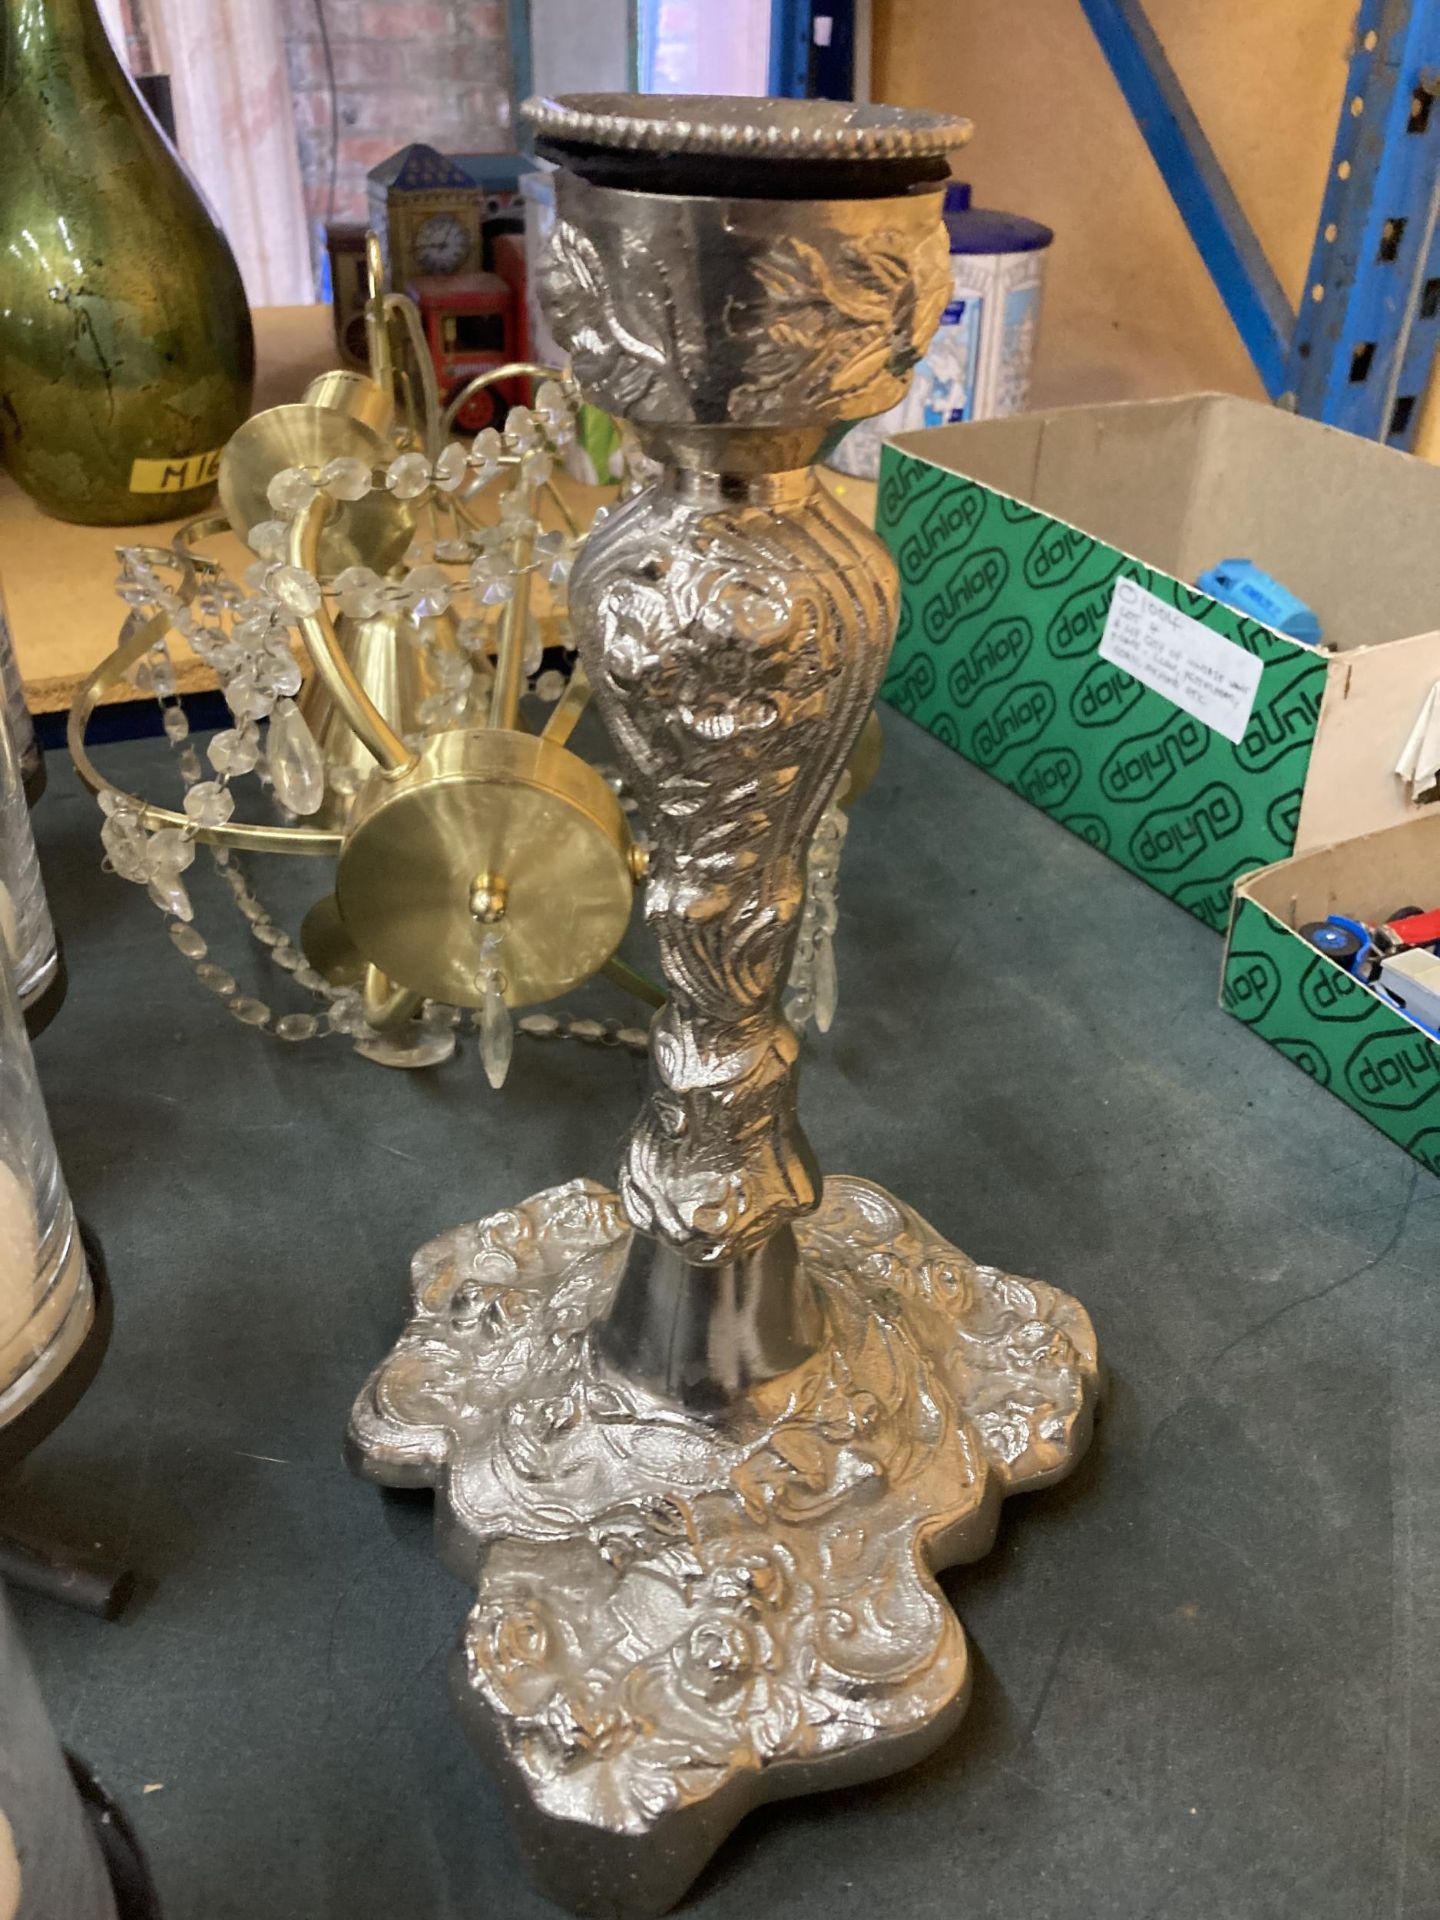 A LARGE METAL CANDLE HOLDER HOLDING FOUR LARGE CANDLES IN GLASS HOLDERS, A LARGE SILVER COLOURED - Image 3 of 5